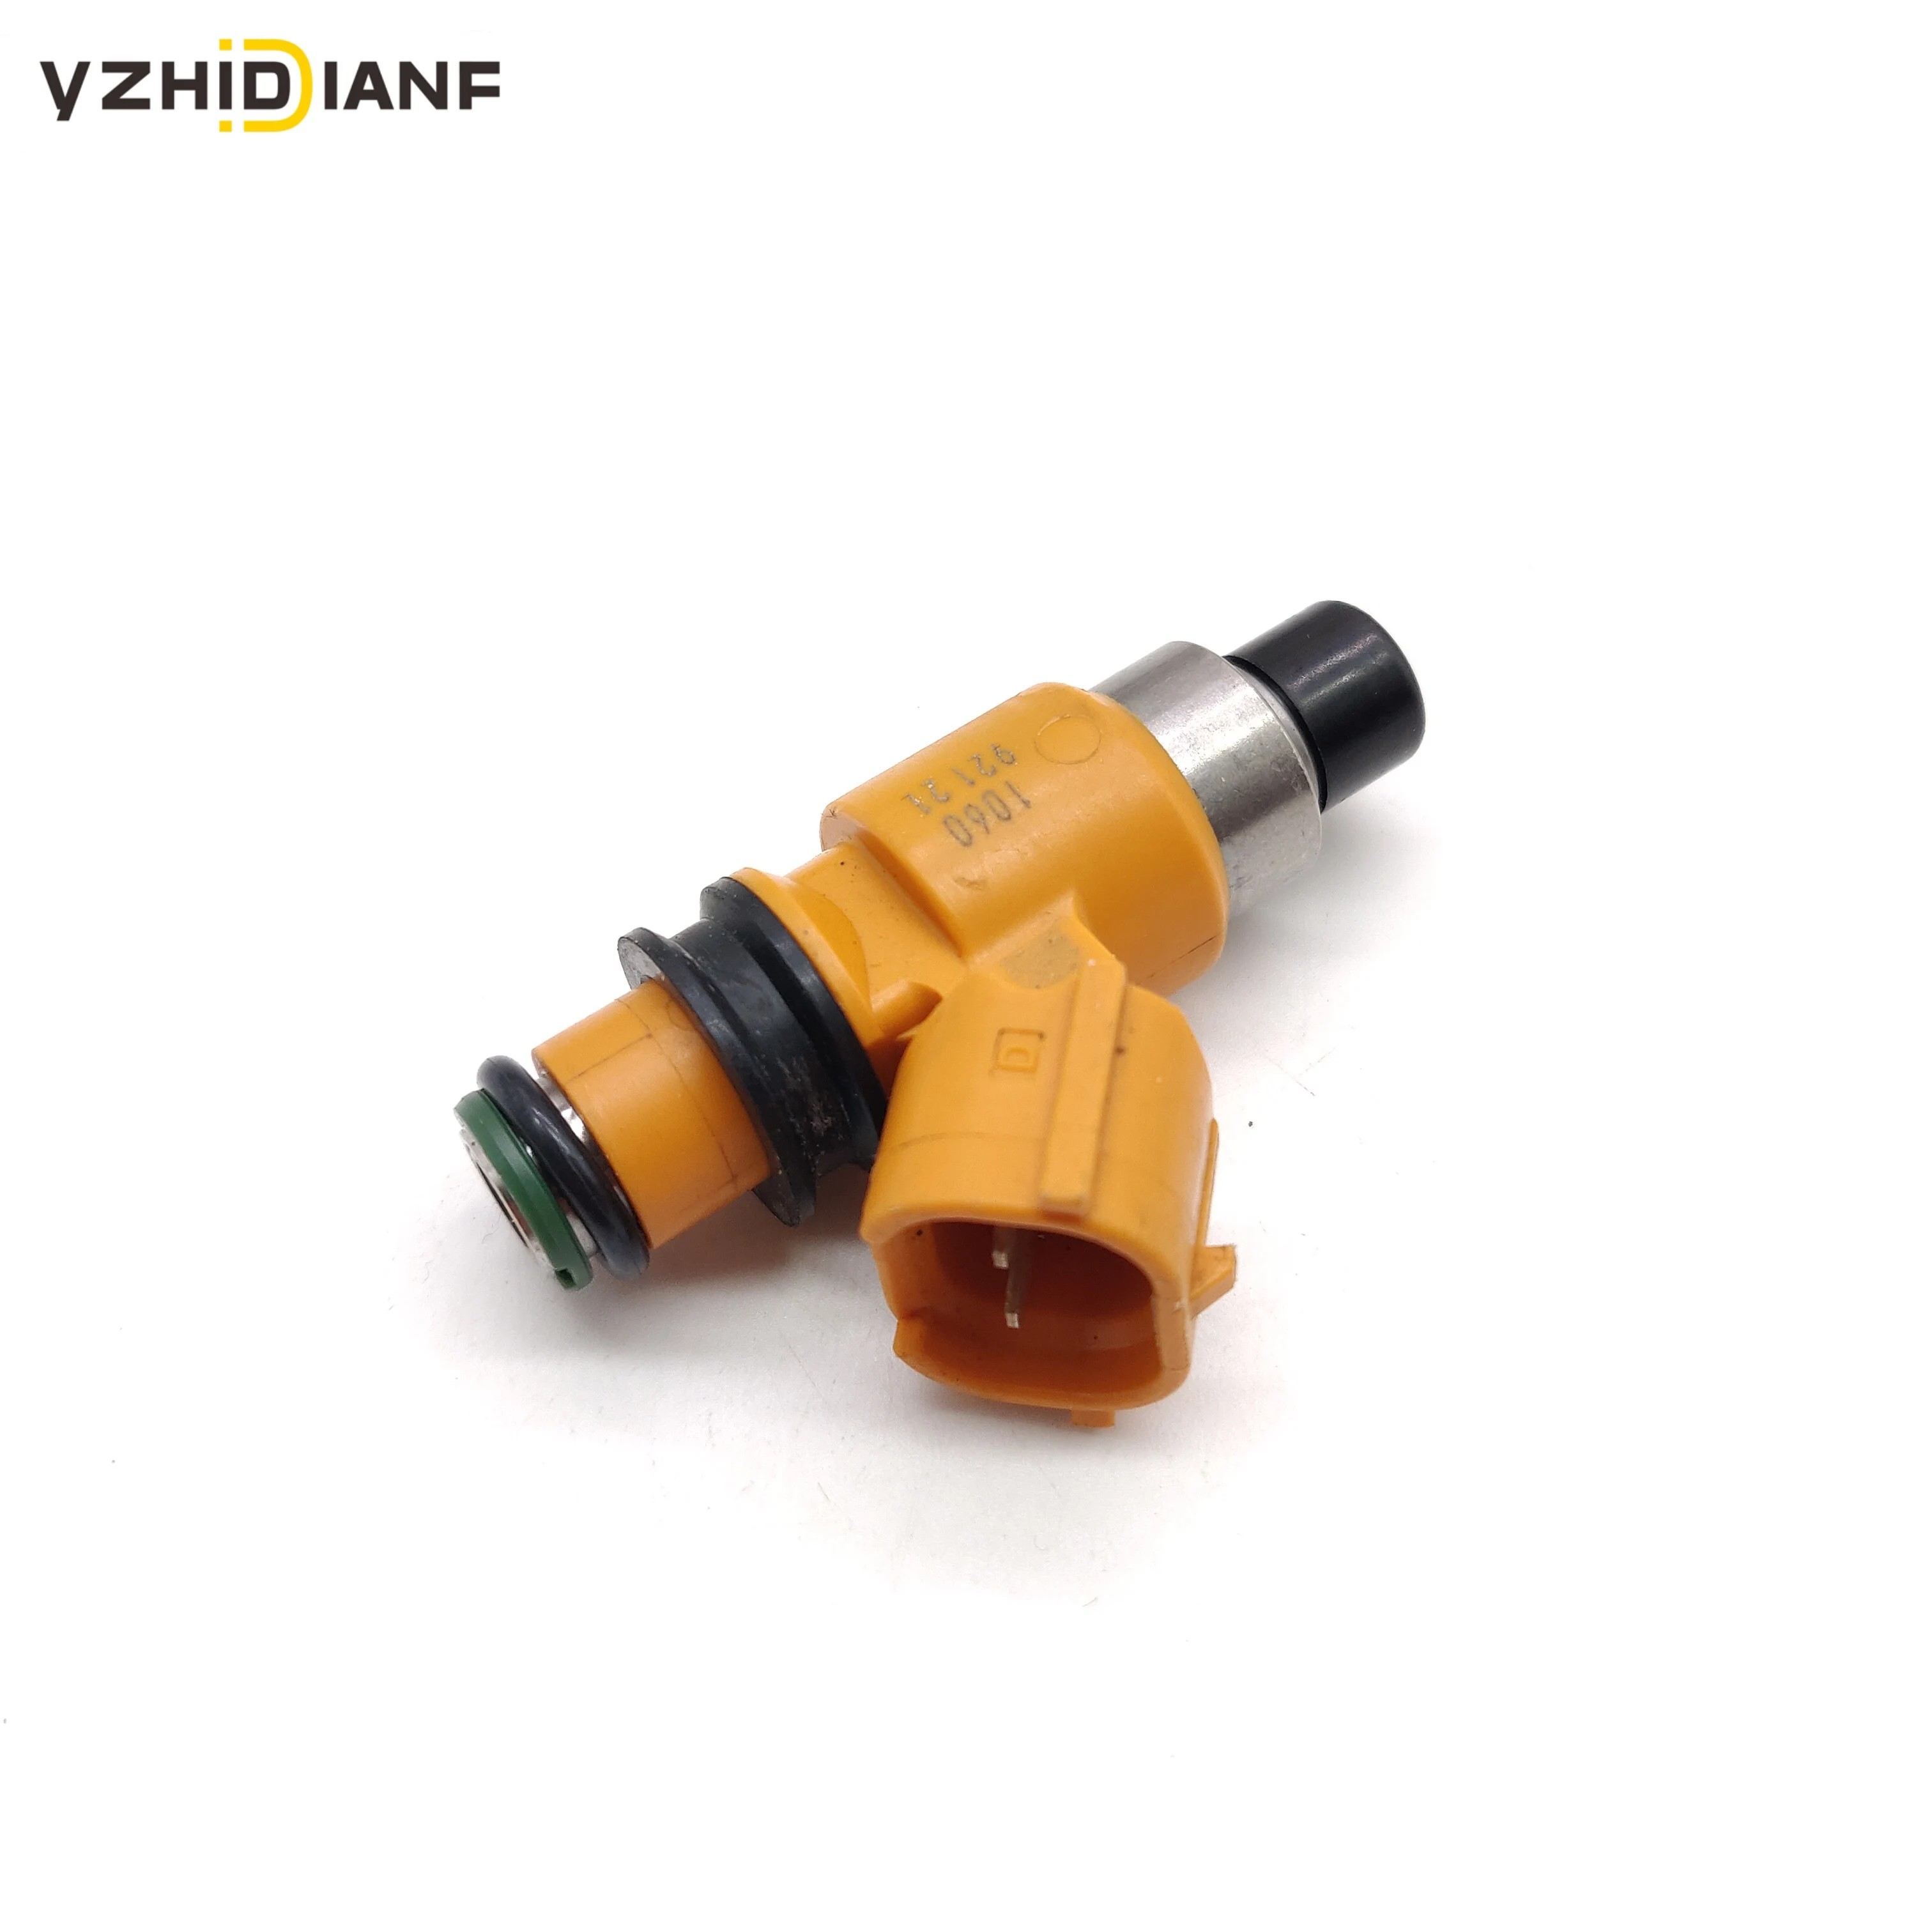 

1pc High quality Fuel injectors for HONDA- made by 100% professional factory OEM 16450-MFJ-A01